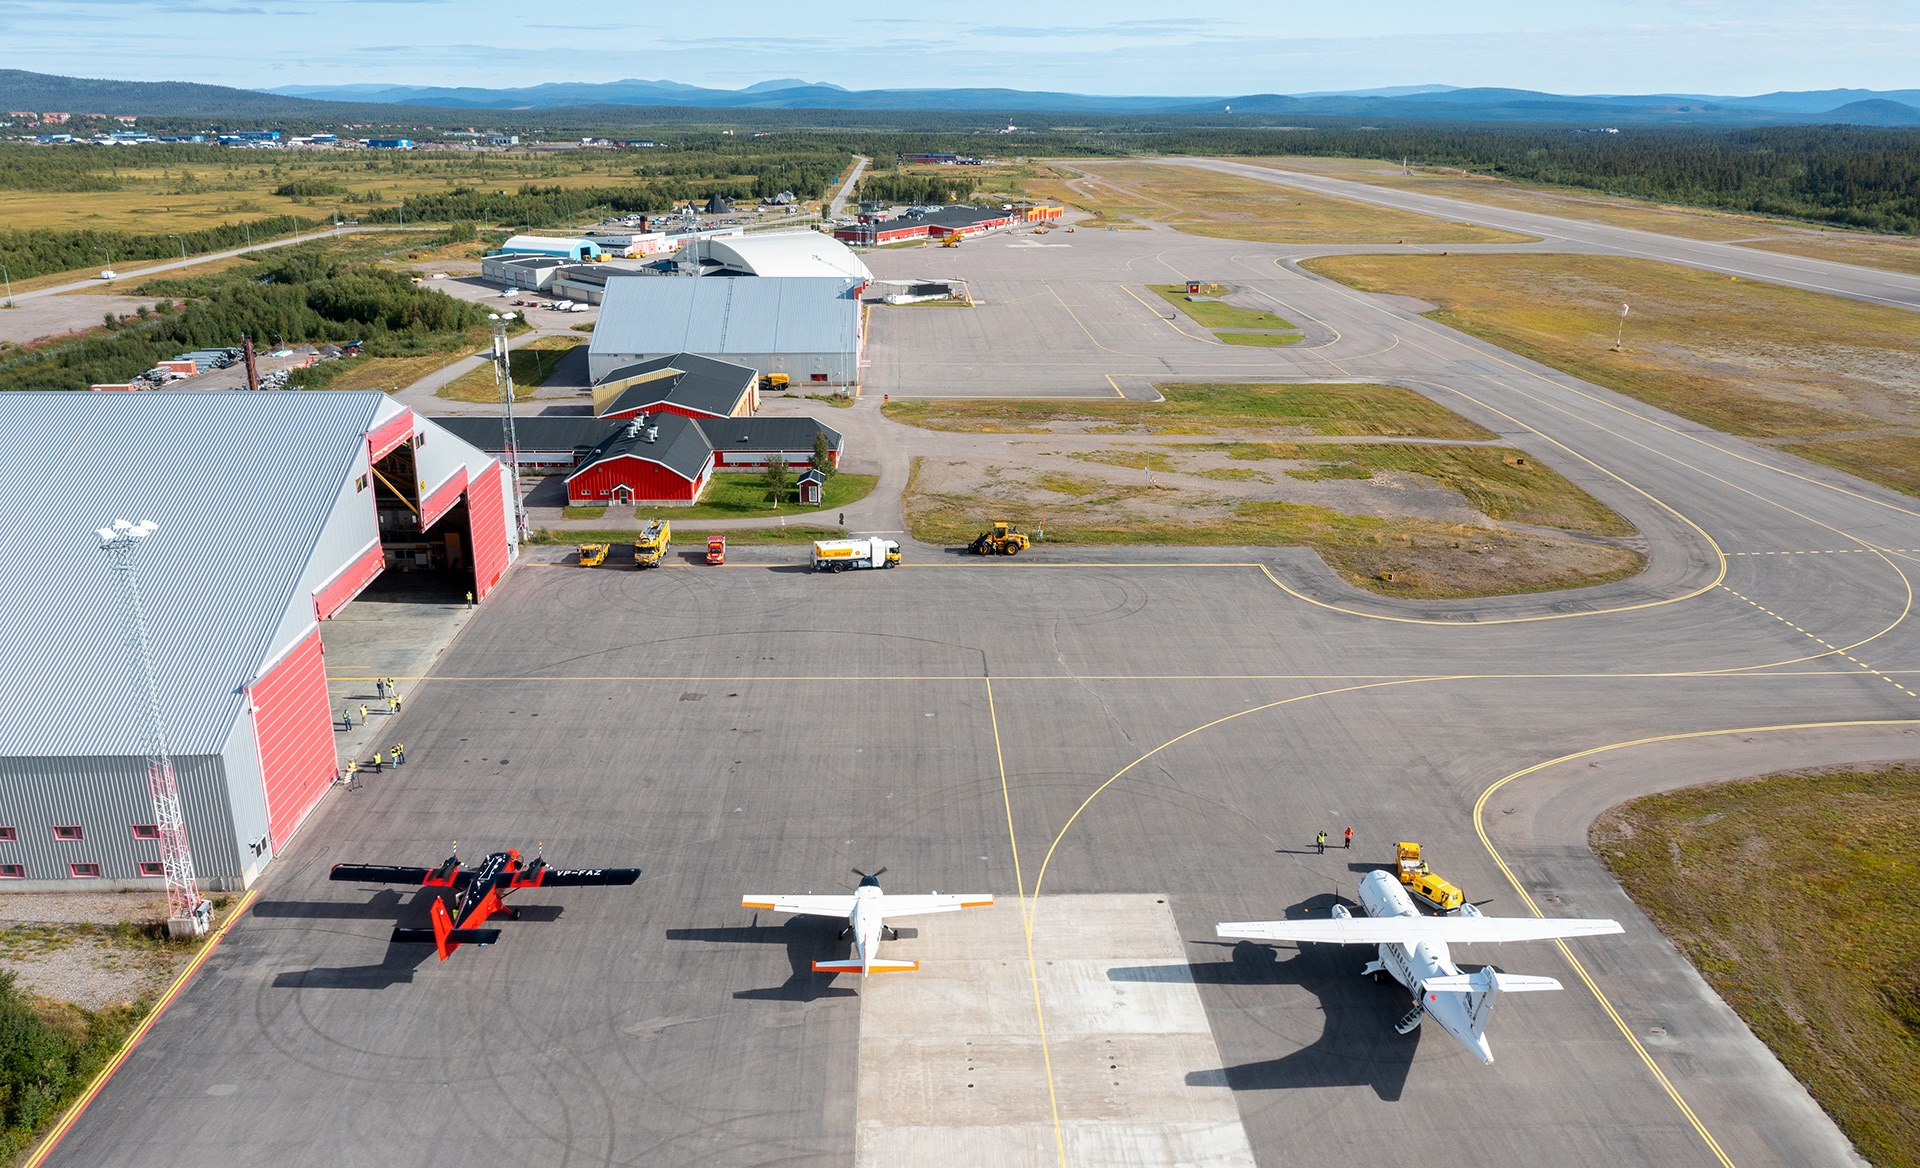 DLR Cessna between Twin Otter (left) and ATR-42 (right) in Kiruna